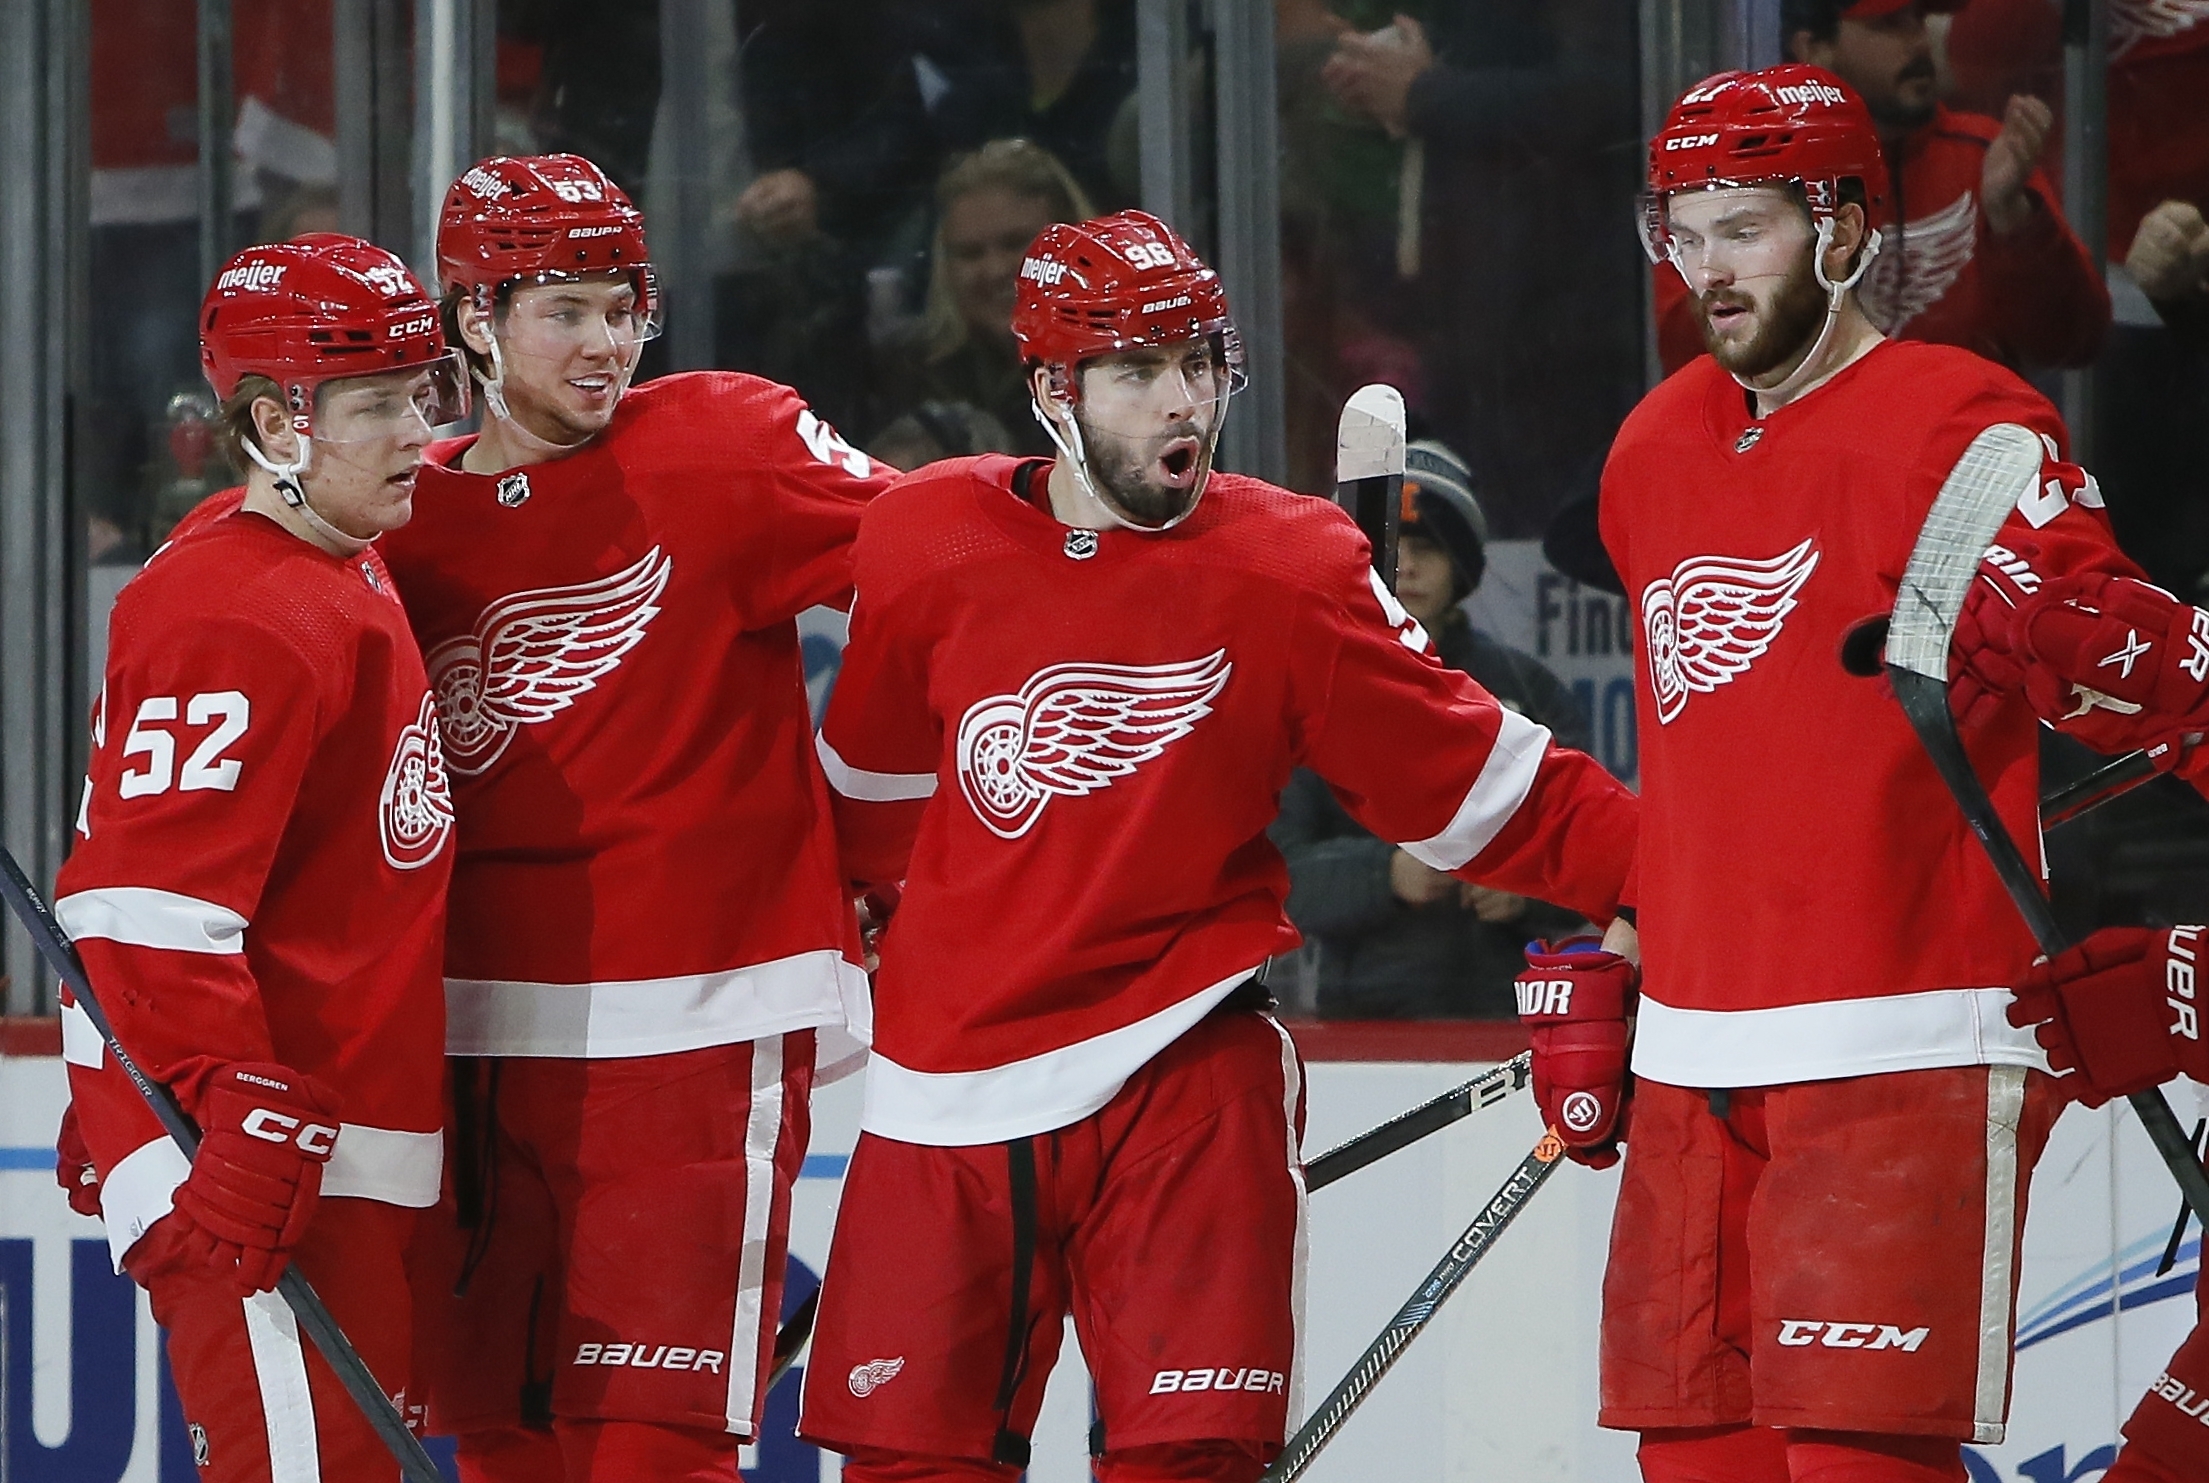 Red Wings, Bally Sports Detroit and Audacy announce broadcast